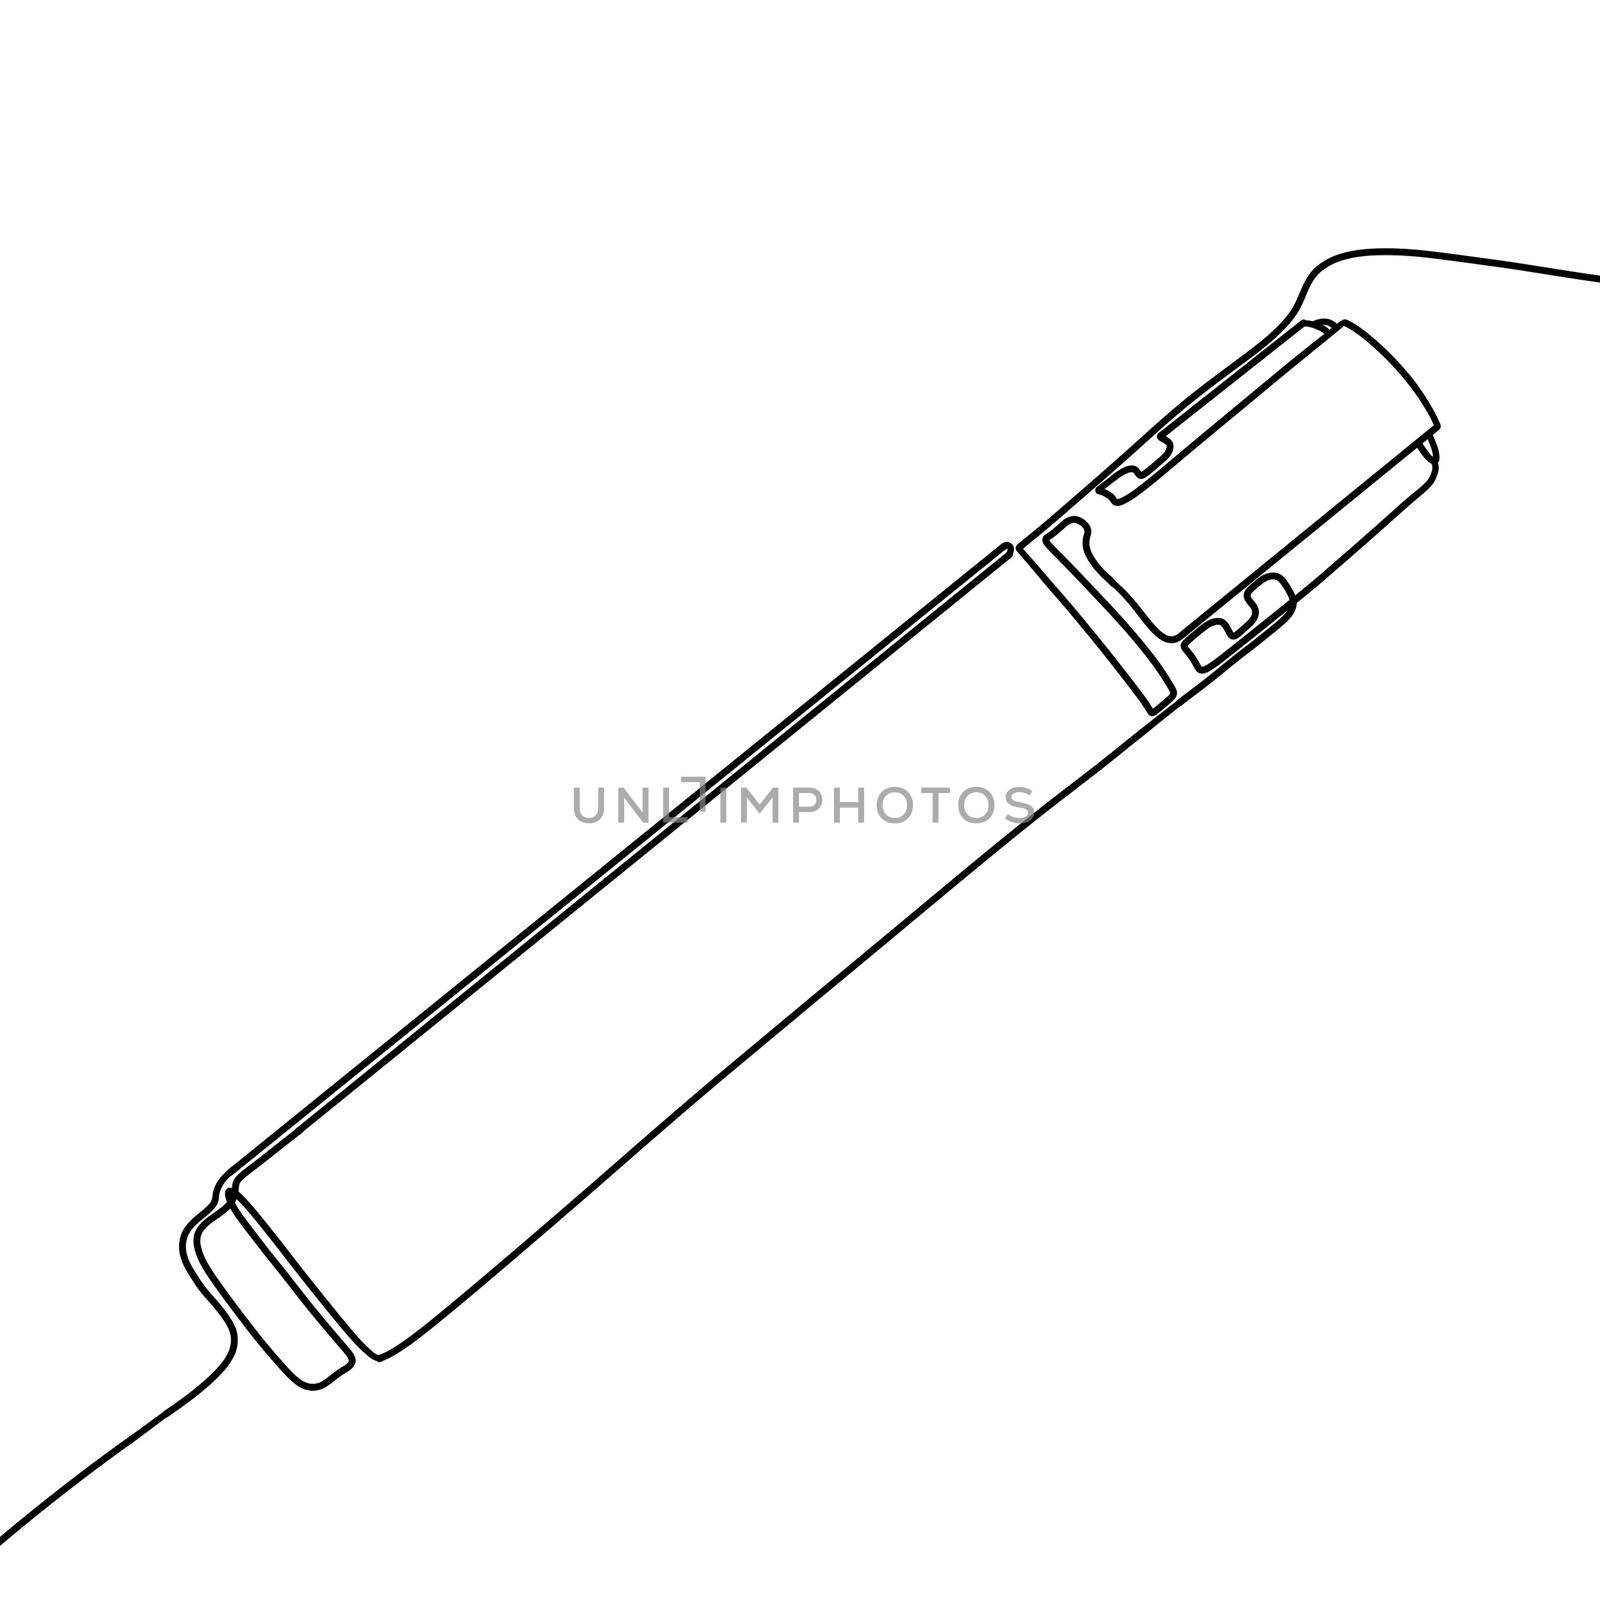 marker pen icon on white background. Simple element illustration from General concept. marker pen icon symbol design.